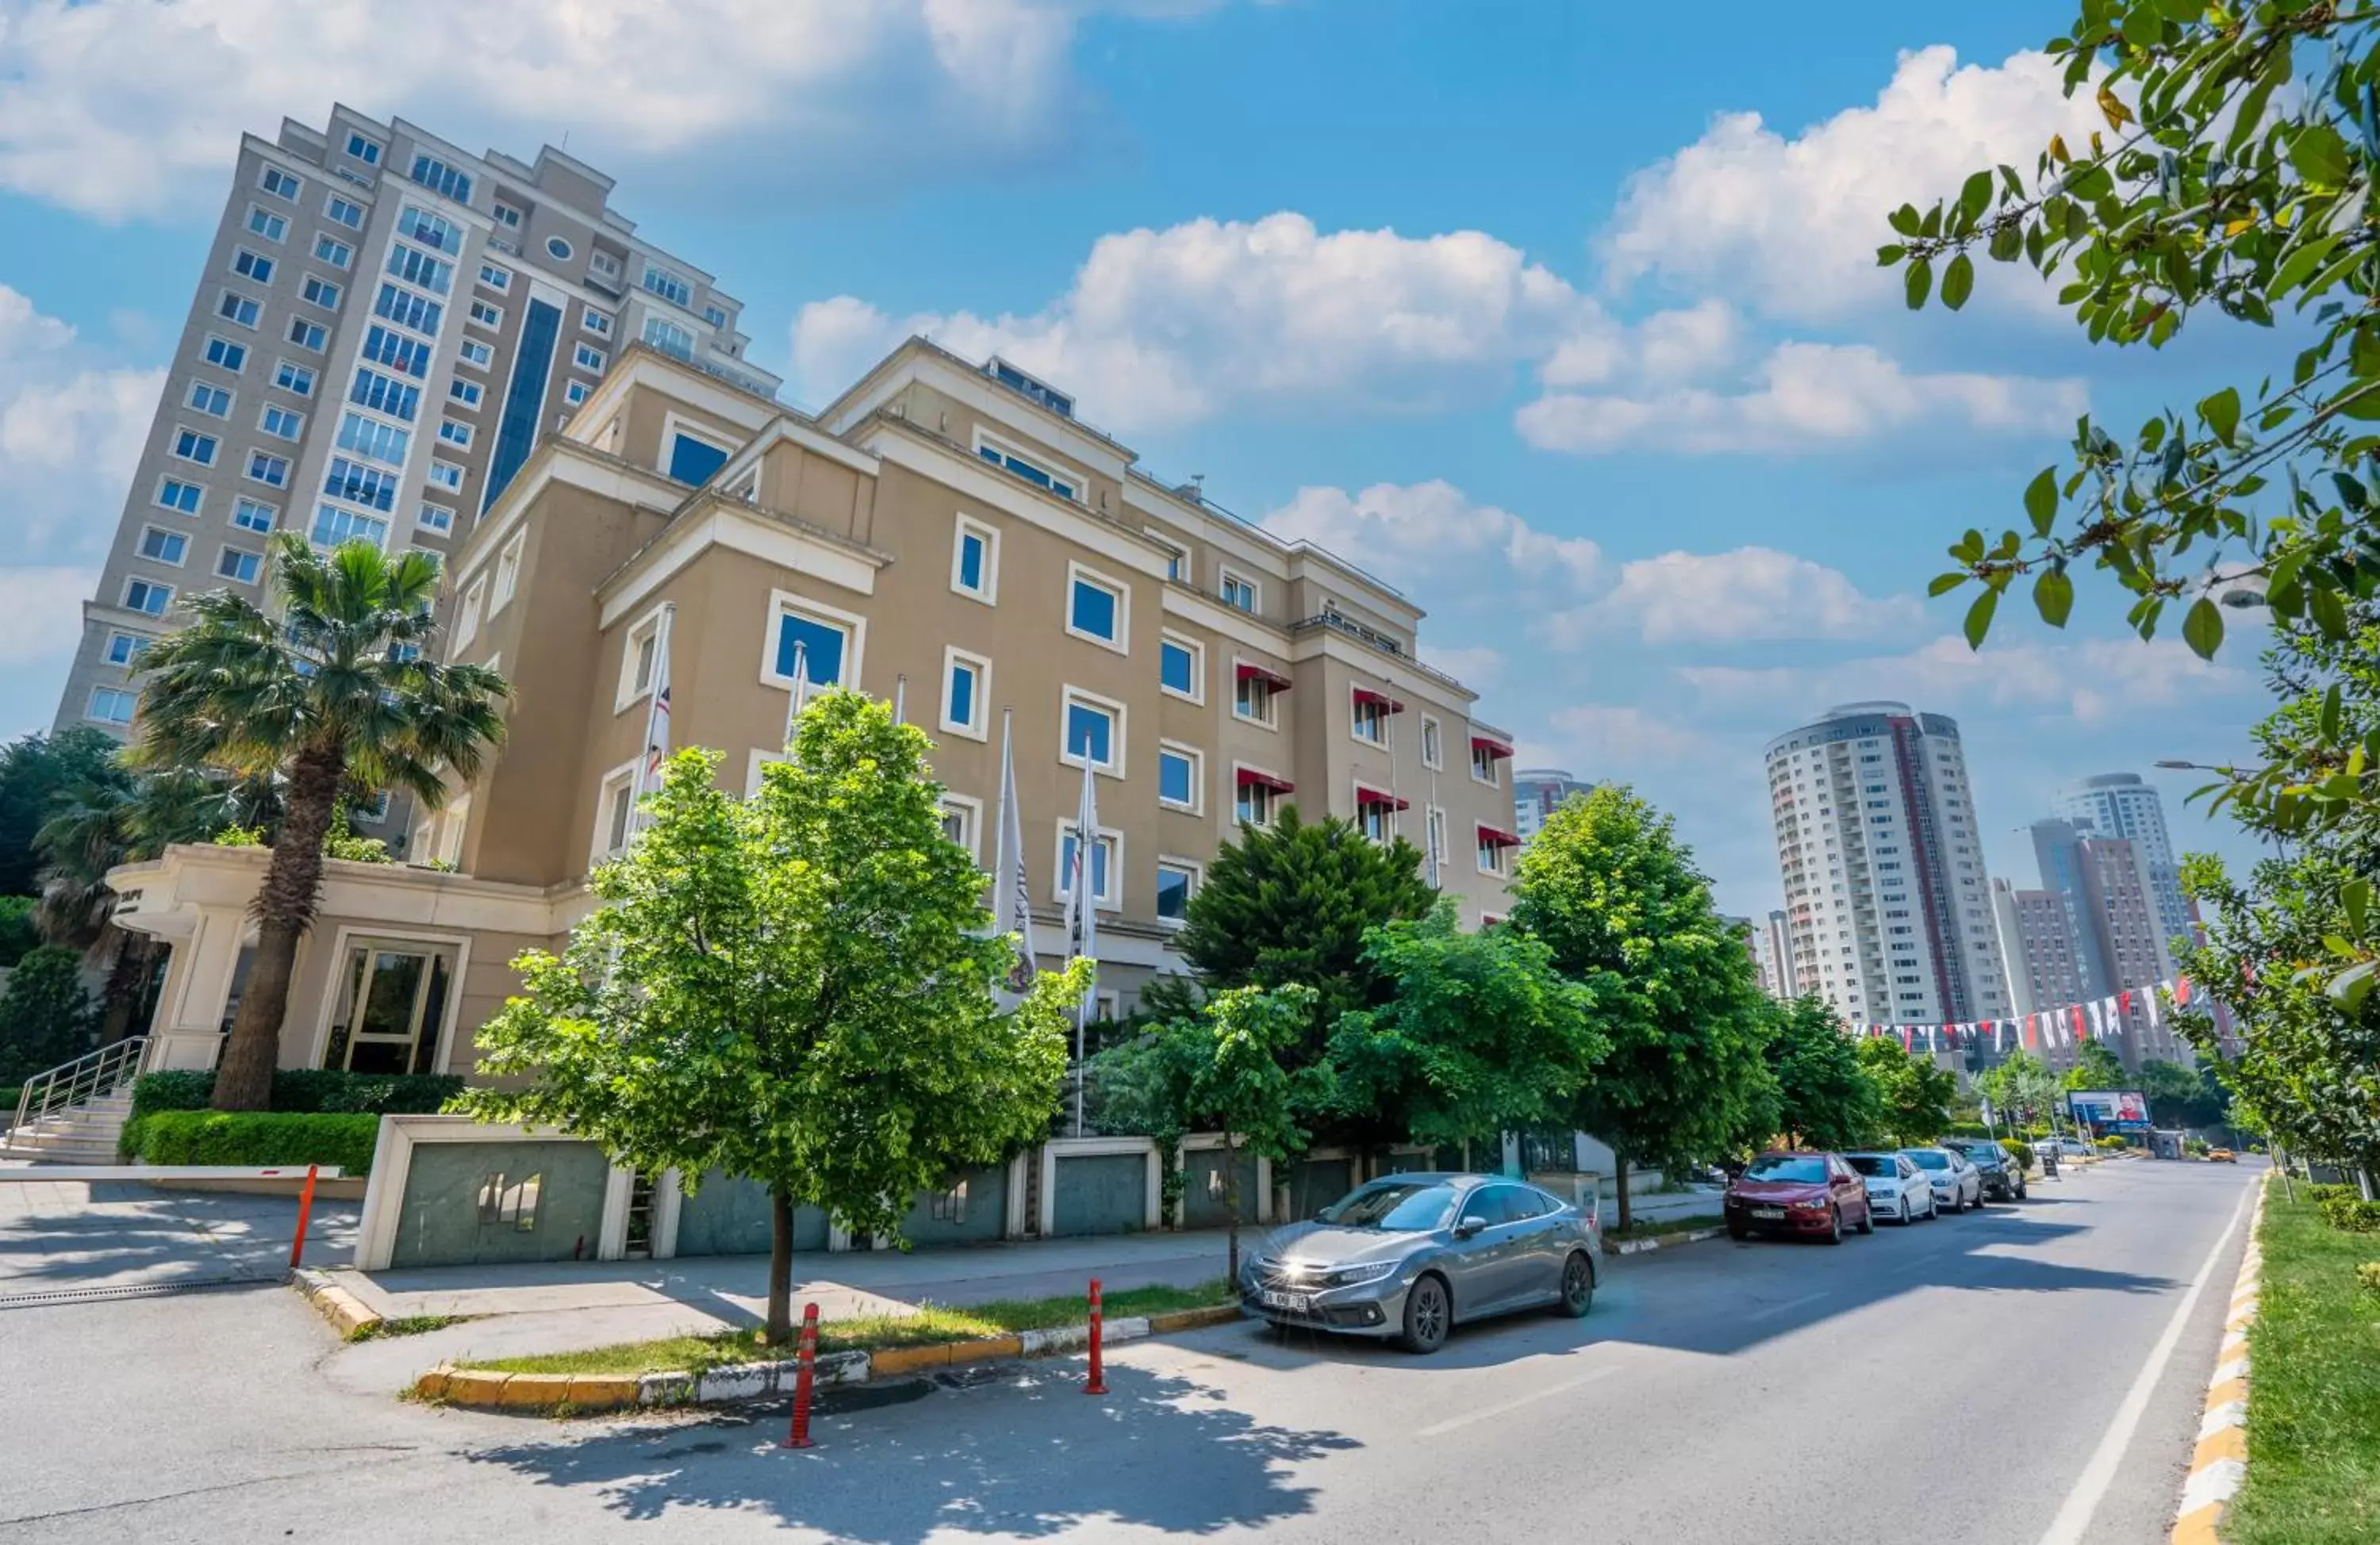 Property building in The Gate 30 Suites Ataşehir